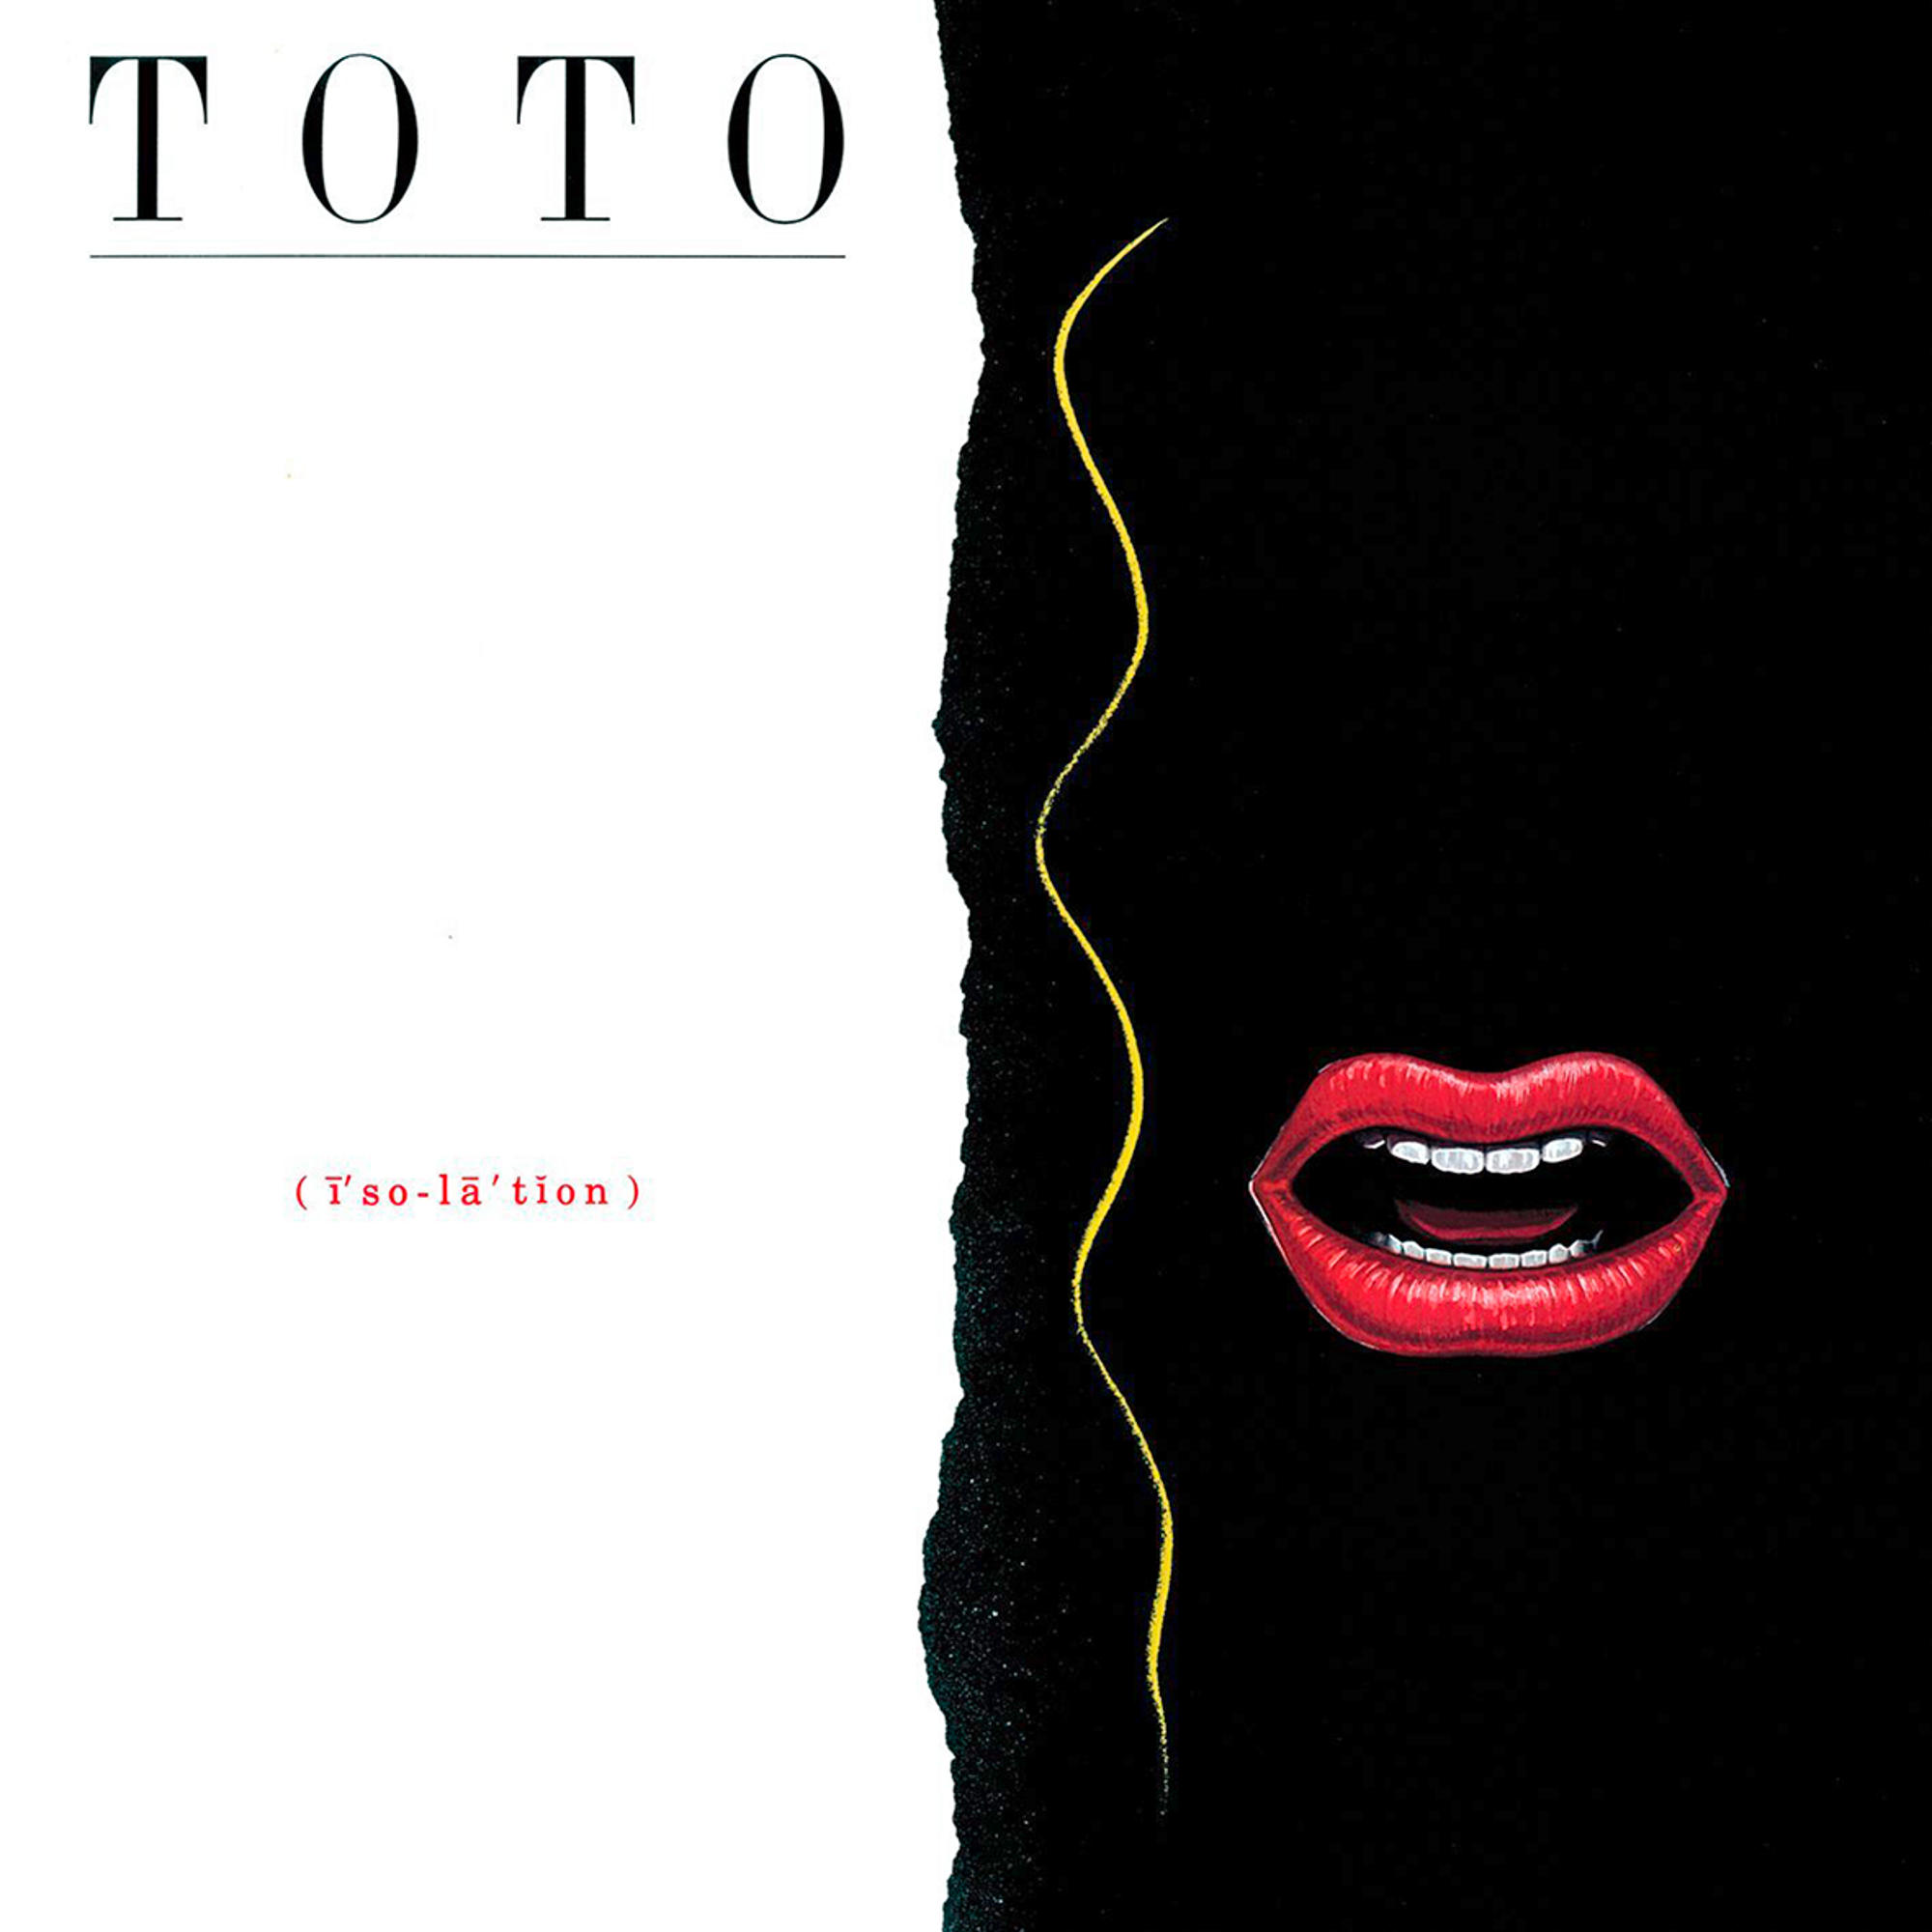 Toto - Isolation (Lim.Collectors Edition) - (CD)